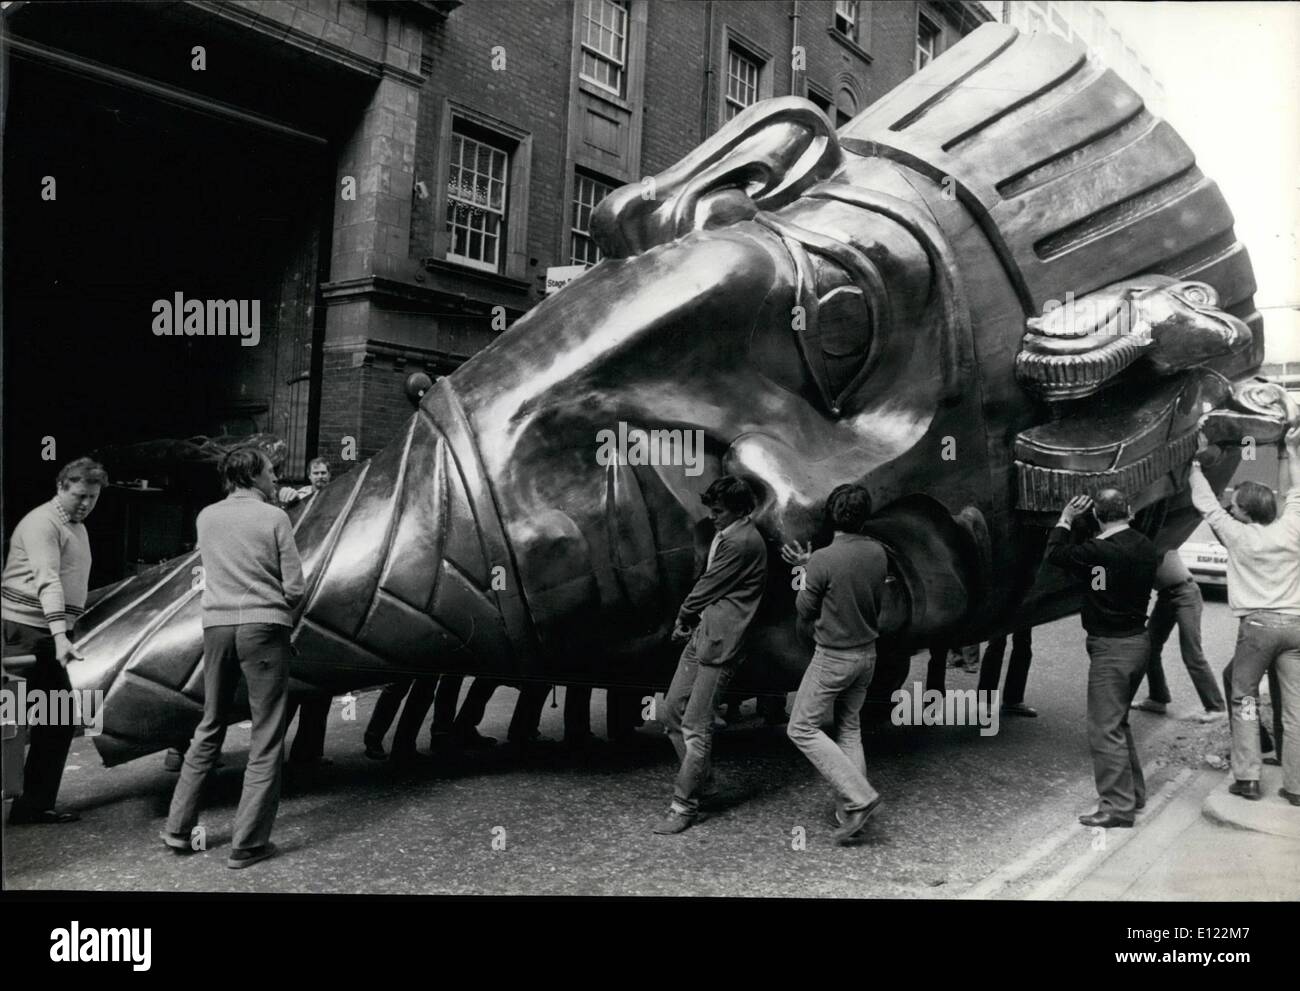 Apr. 04, 1982 - The Golden head of Radames, today one of the world largest stage props was transported by lorry from the London Stock Photo